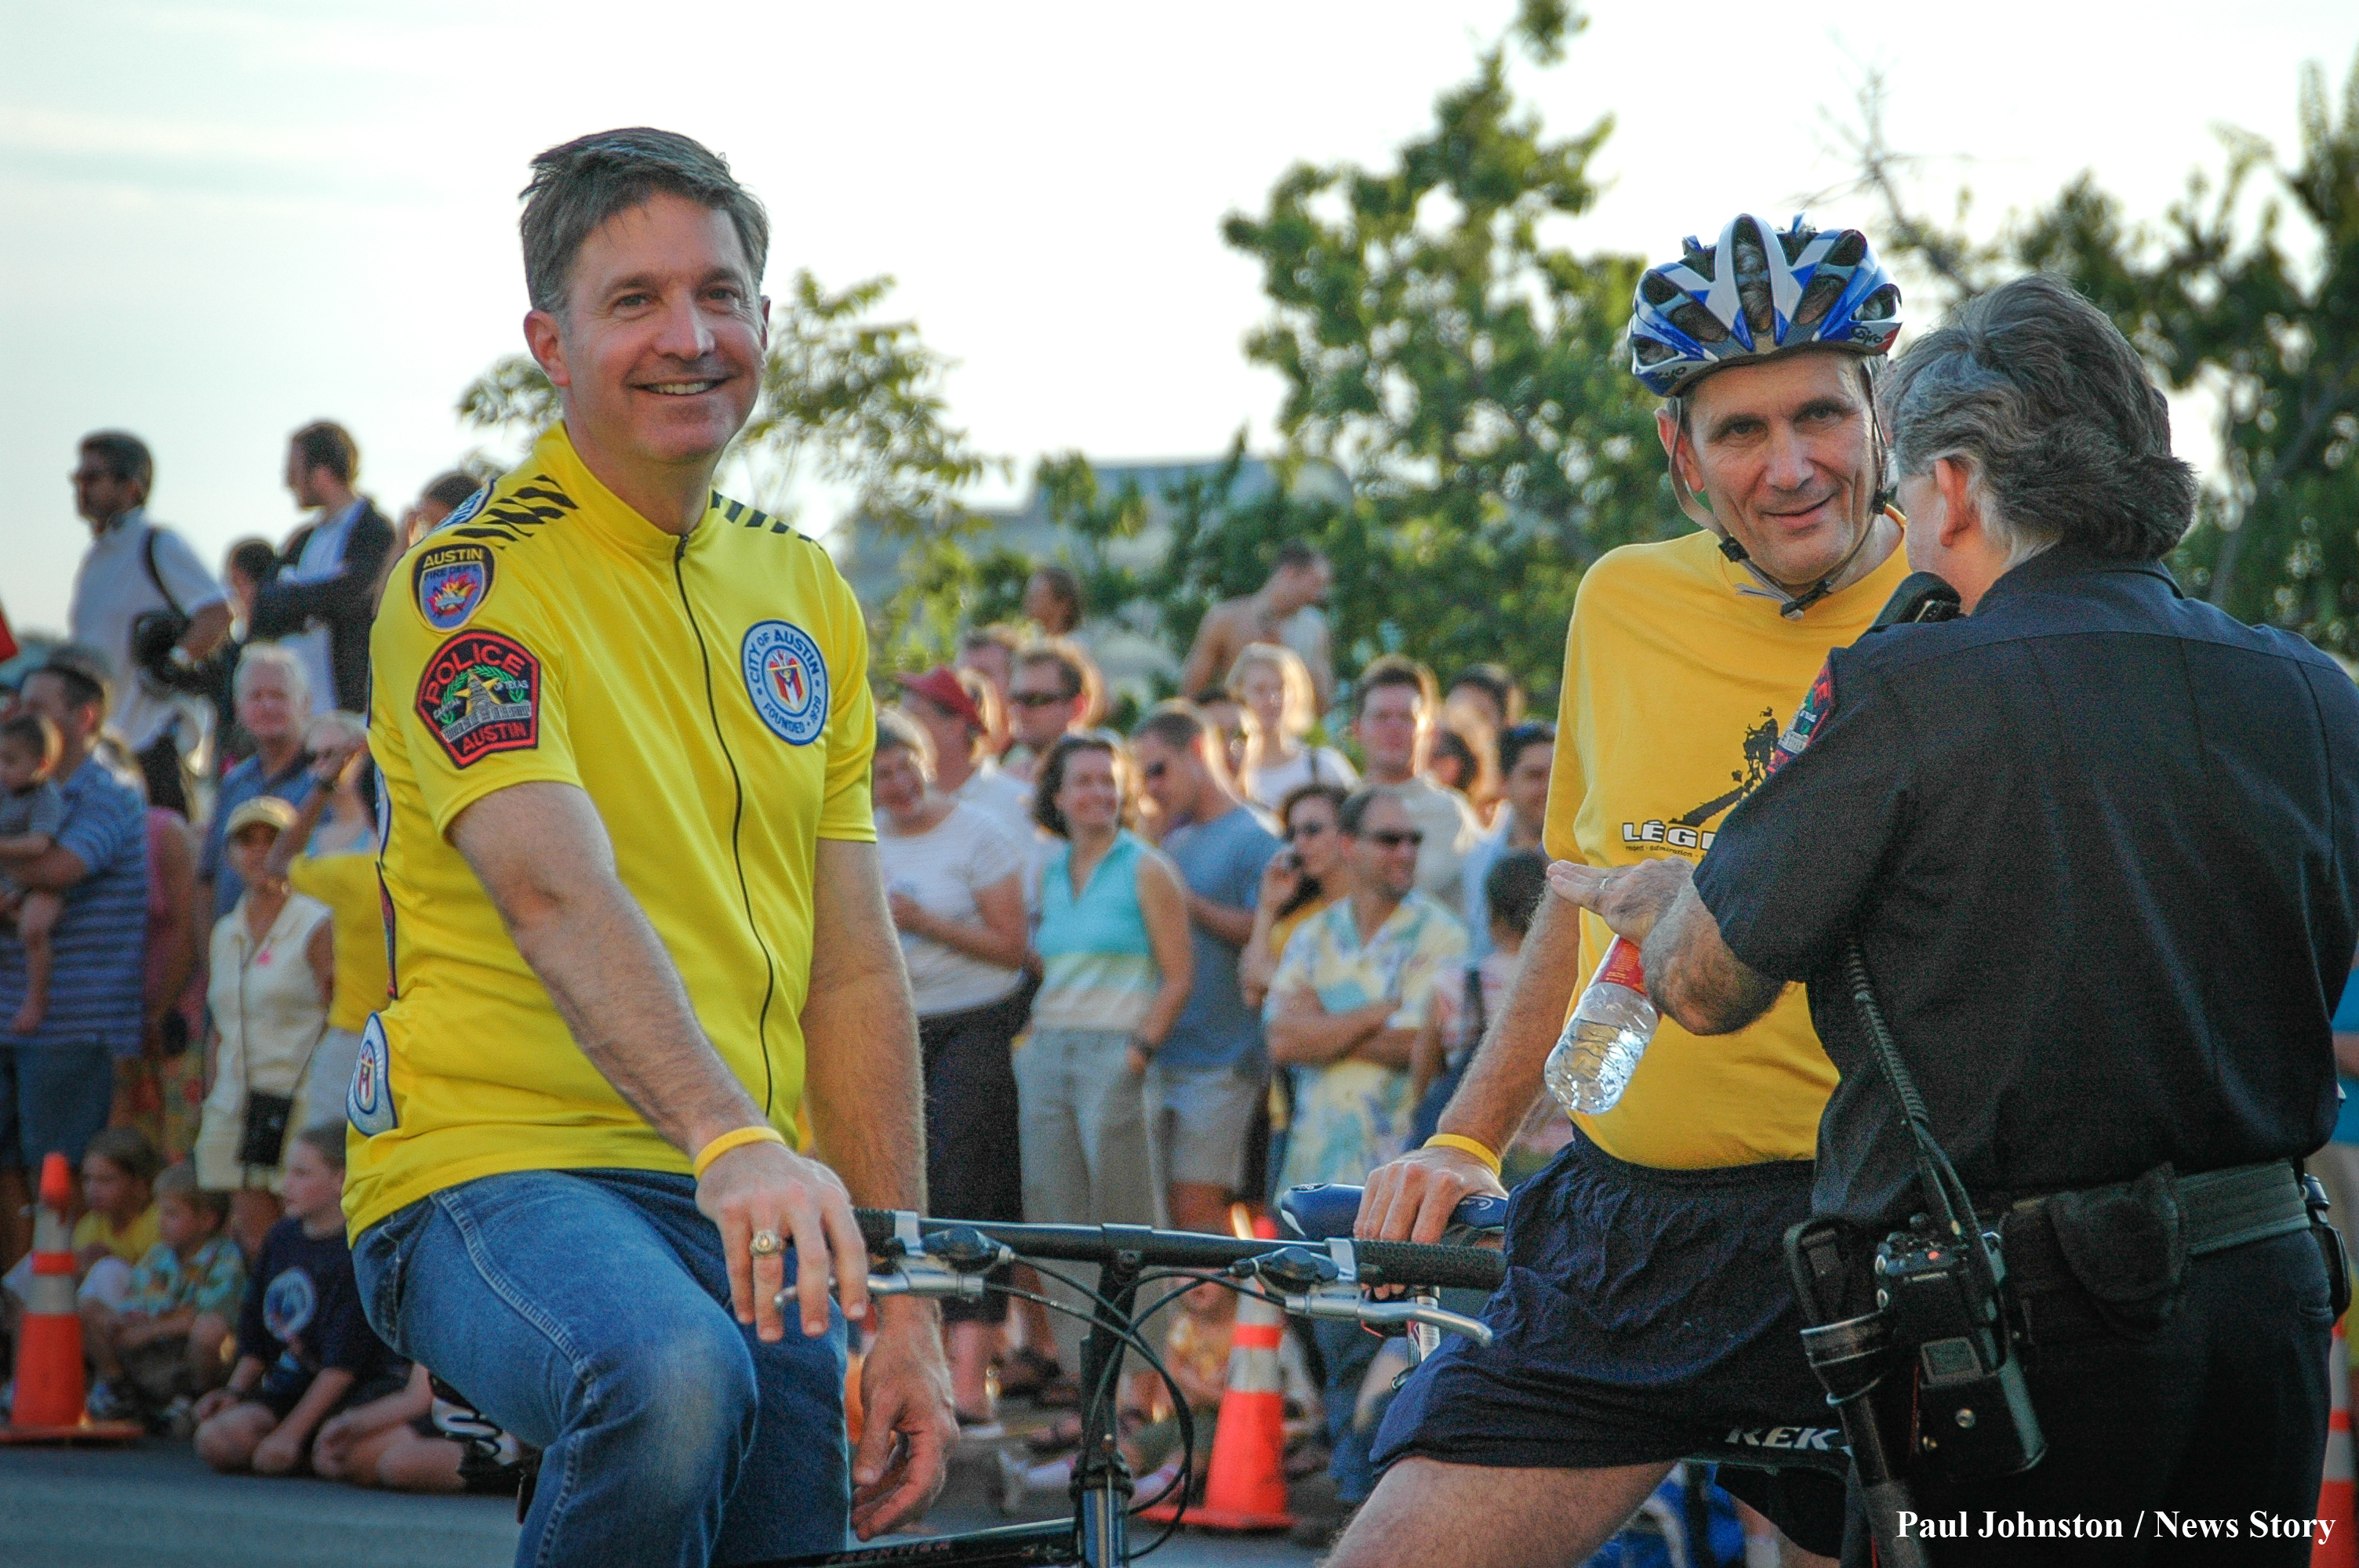 Austin Mayor Will Wynn (left) and Congressman Lloyd Doggett (right) participate in the bicycle parade in honor of Lance Armstrong on August 13, 2004 in Austin, Texas.  Copyright - Paul Johnston / Austin News Story - austinnewsstory.com